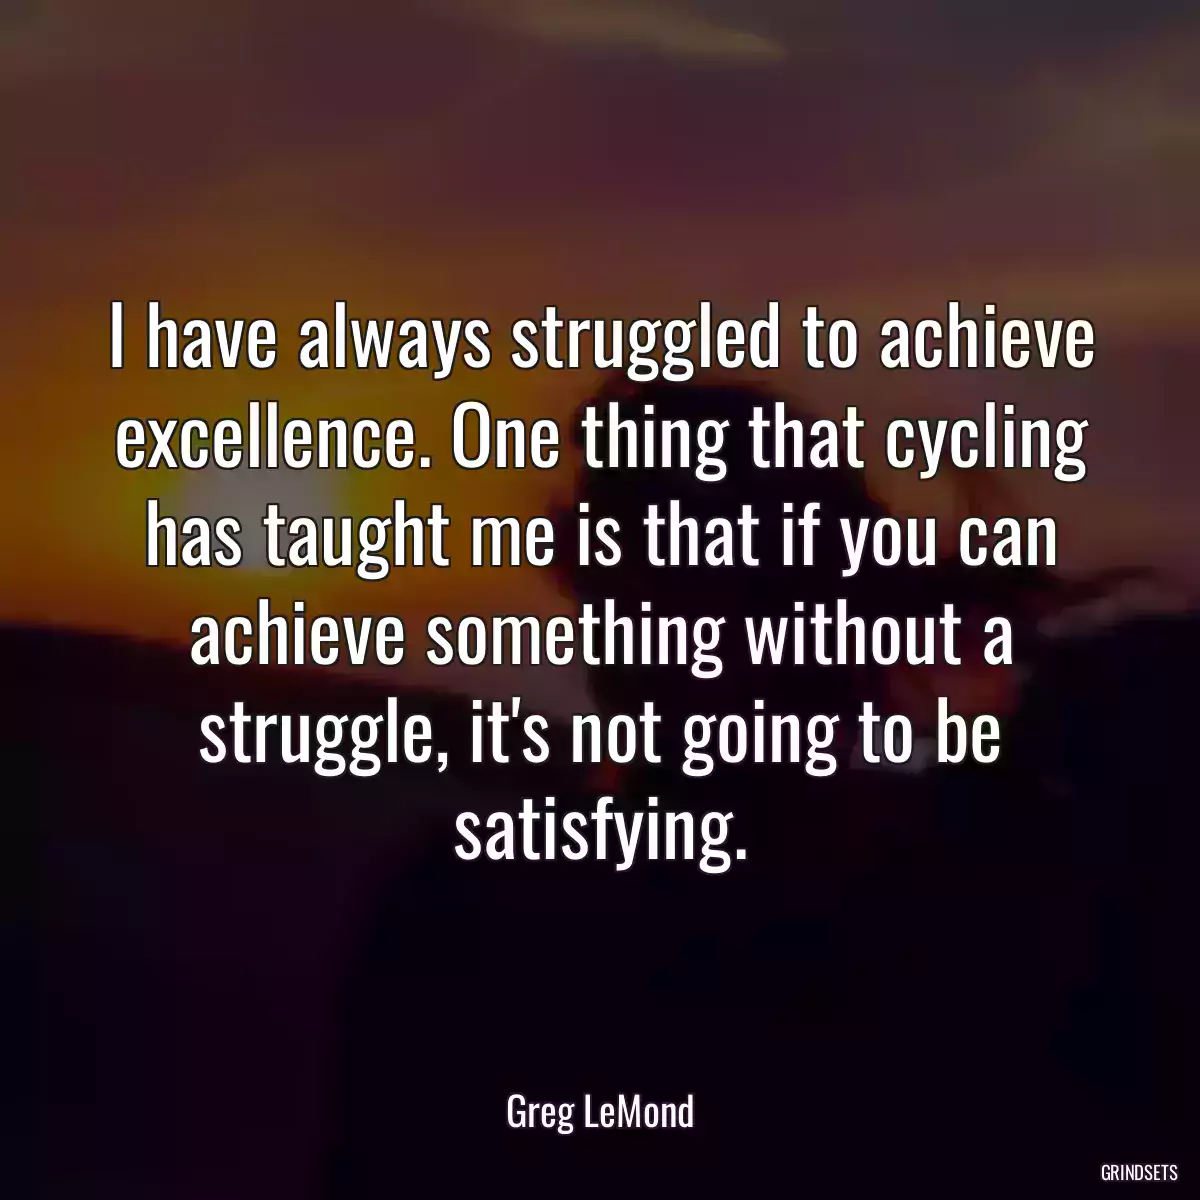 I have always struggled to achieve excellence. One thing that cycling has taught me is that if you can achieve something without a struggle, it\'s not going to be satisfying.